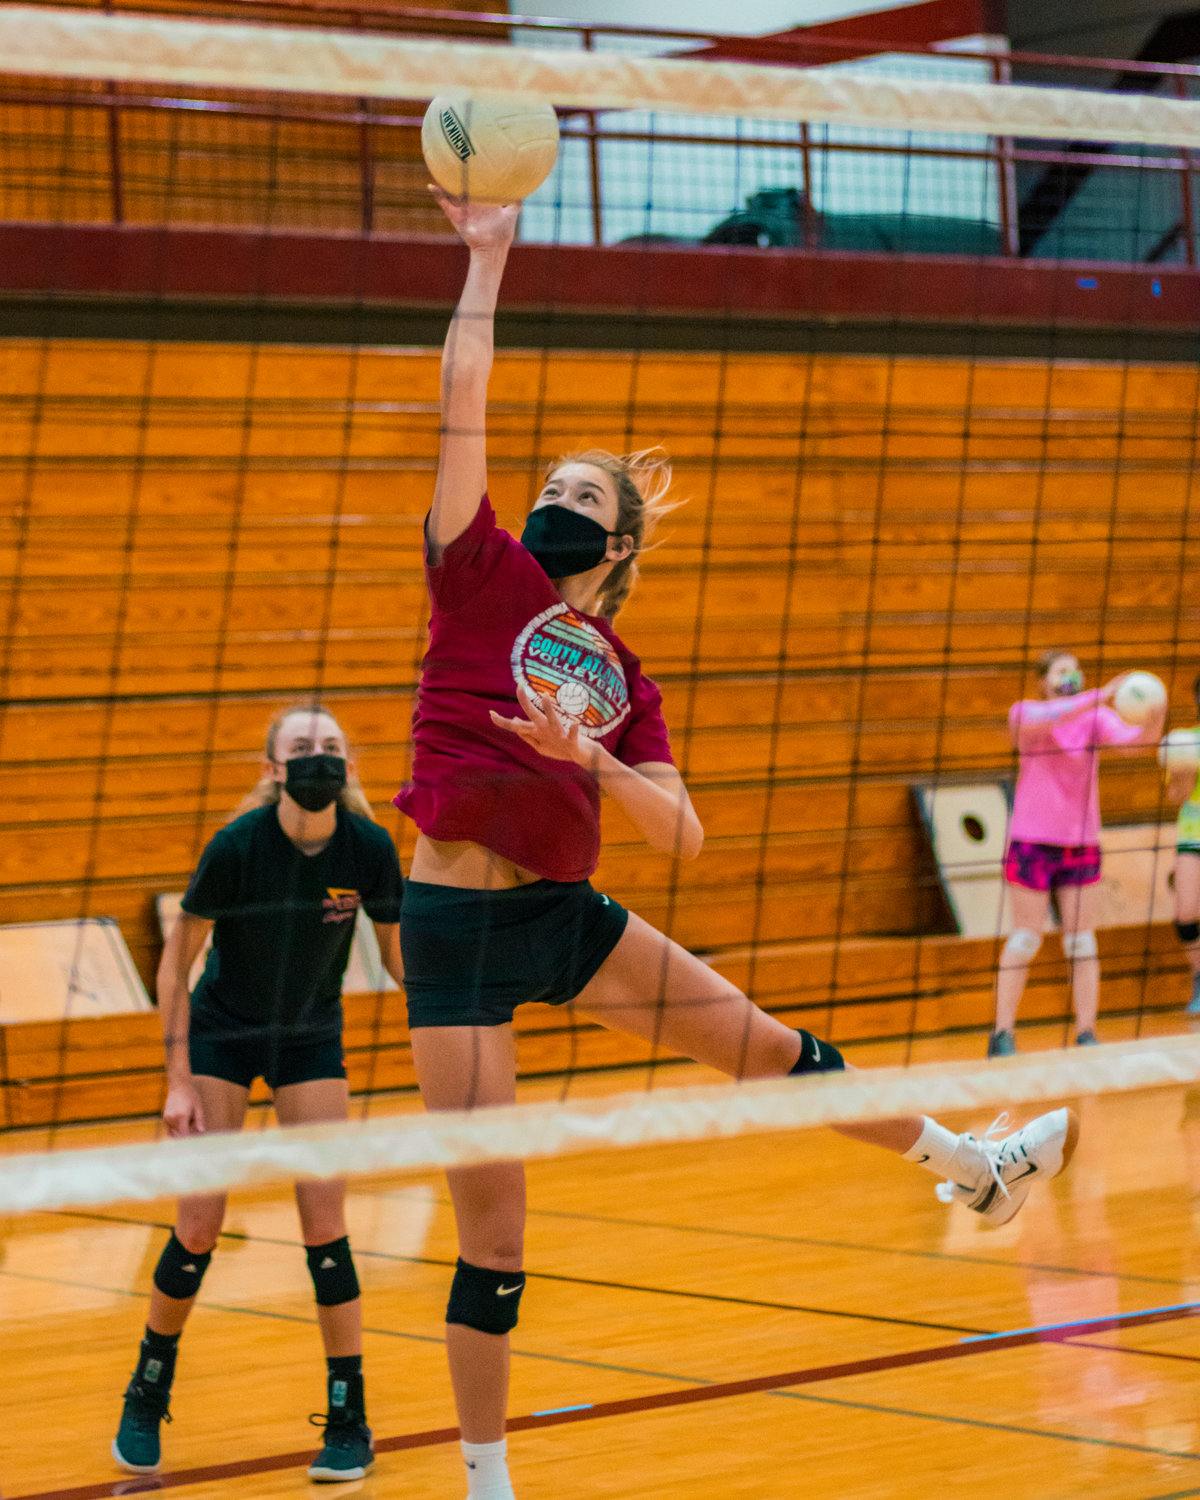 W.F. West's Ava Olsen hits the ball over the net during practice Wednesday afternoon in Chehalis.